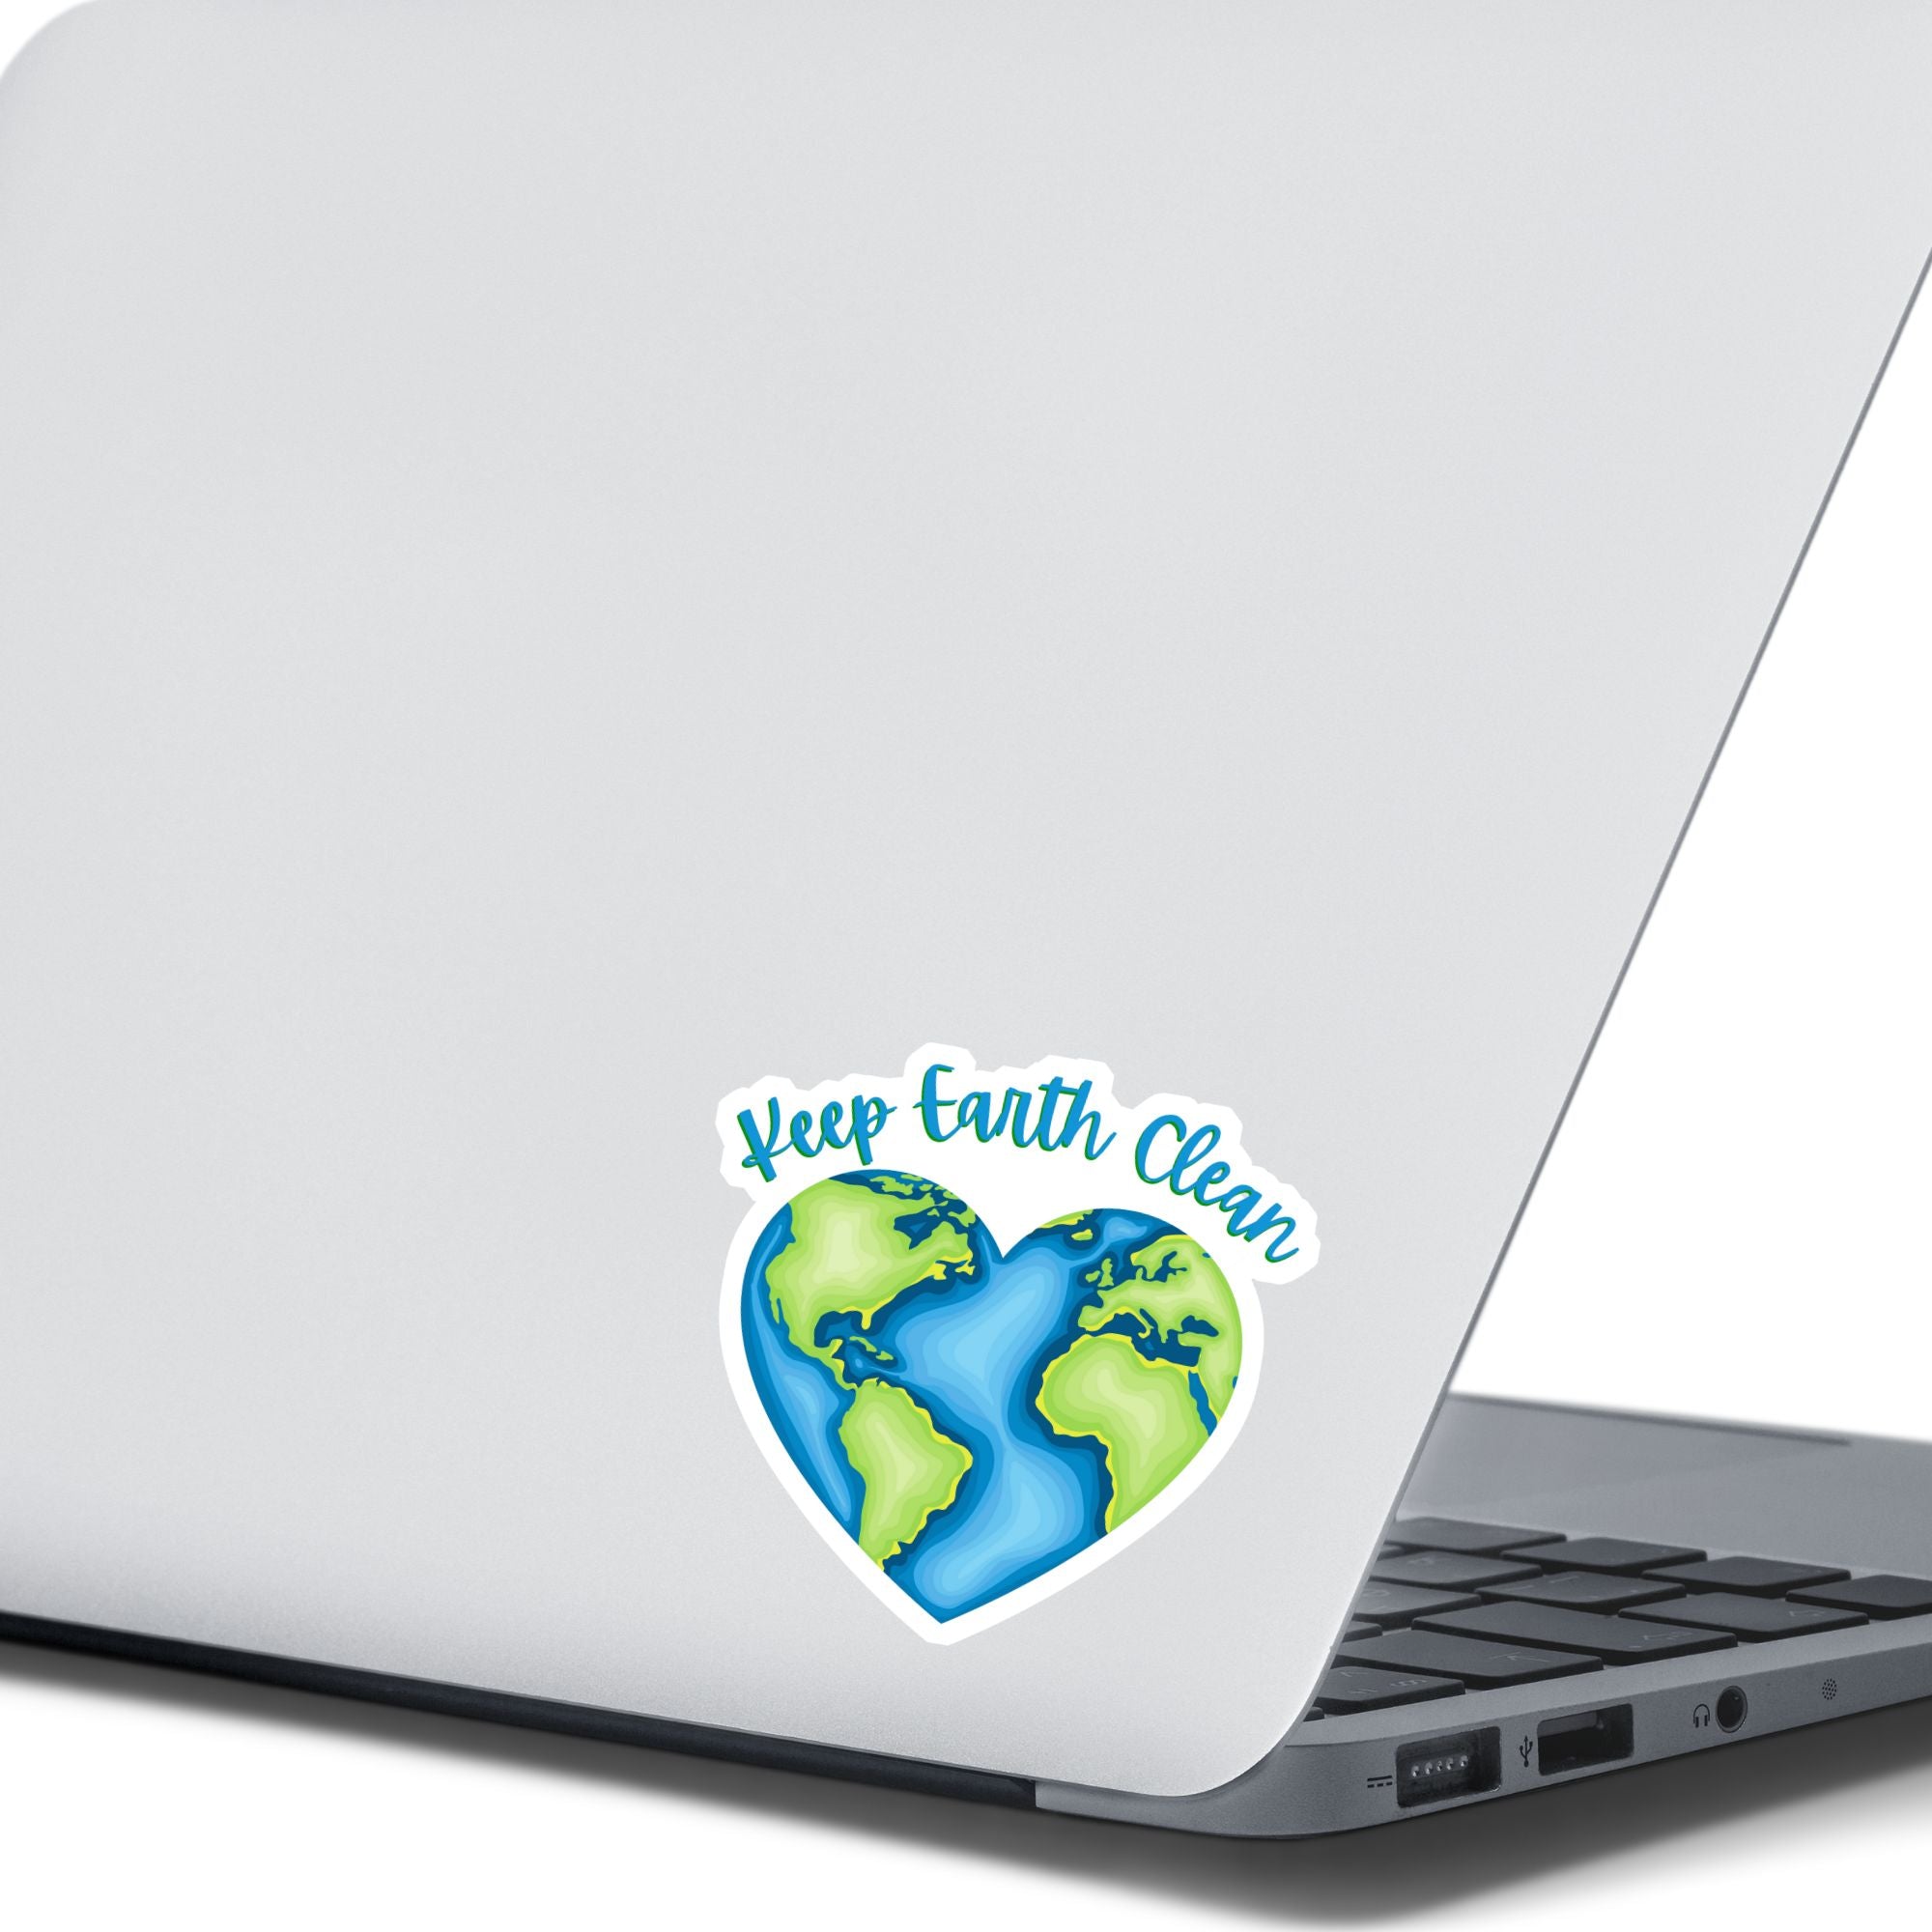 Keep Earth Clean, it's the only home we have! This individual die-cut sticker features the earth in a heart shape with Keep Earth Clean written above. Check out our Inspirational collection for more inspiring stickers! This image show the Keep Earth Clean sticker on the back of an open laptop.